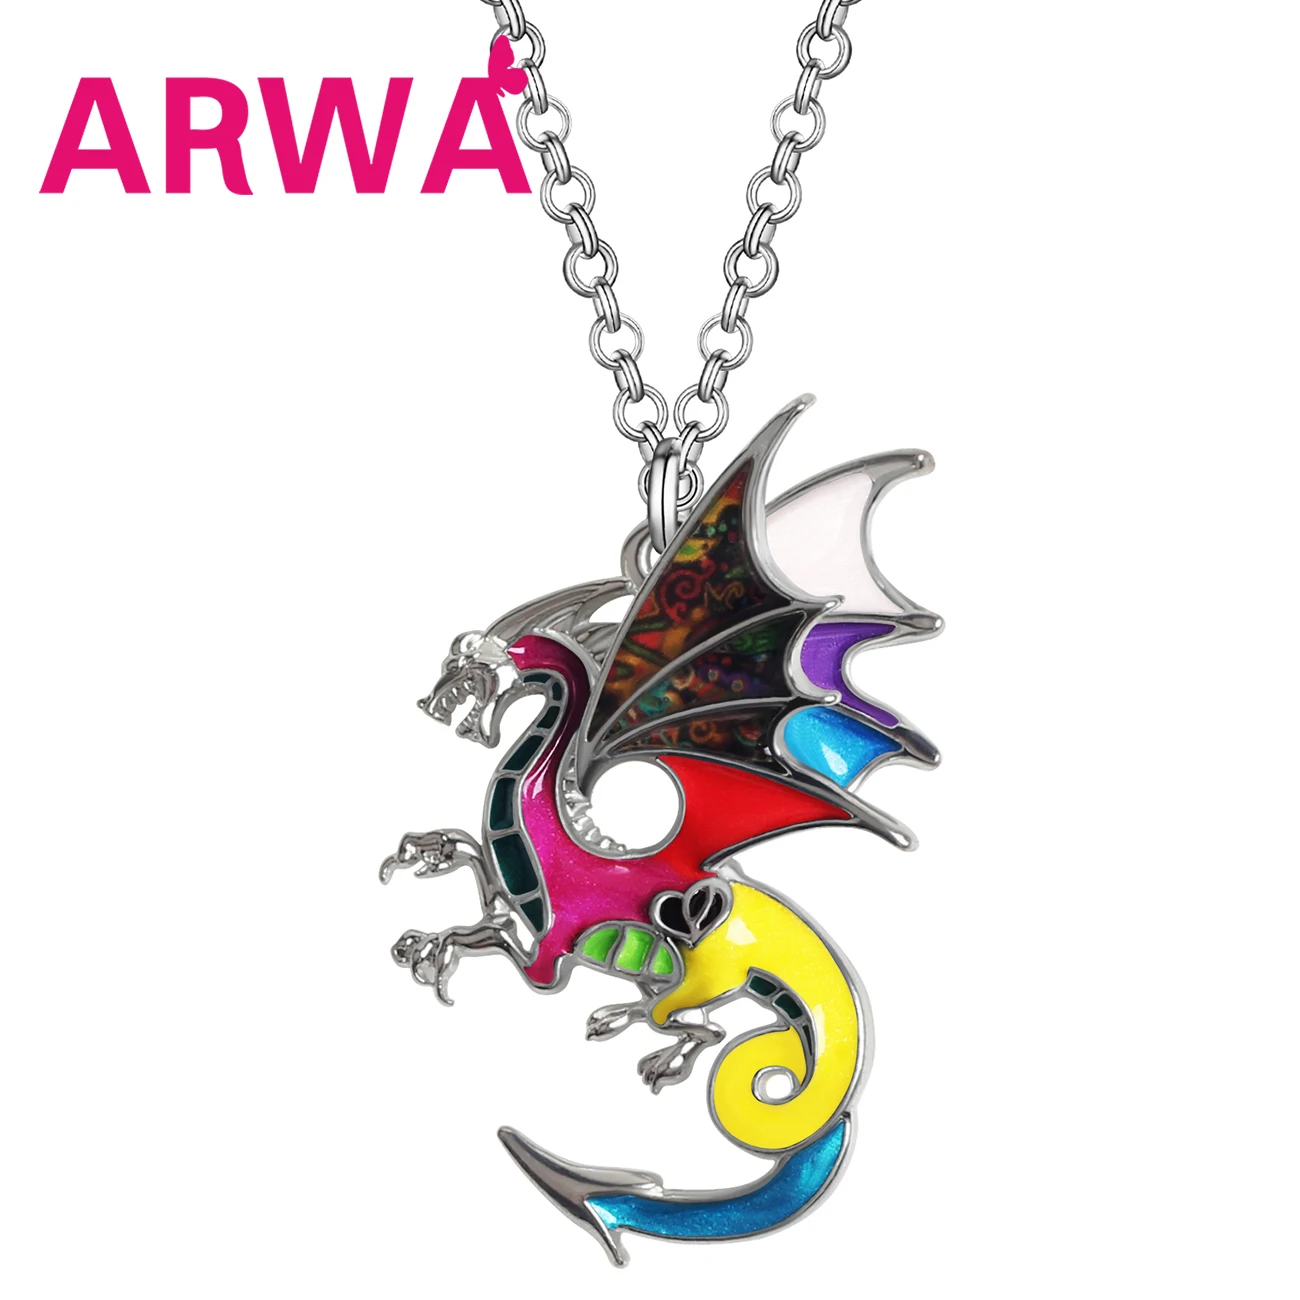 

ARWA Enamel Alloy 3D Curly Tail Dinosaur Mythical Dragon Necklace Pendant Trendy Chain Jewelry For Women Men Teens Charm Gifts